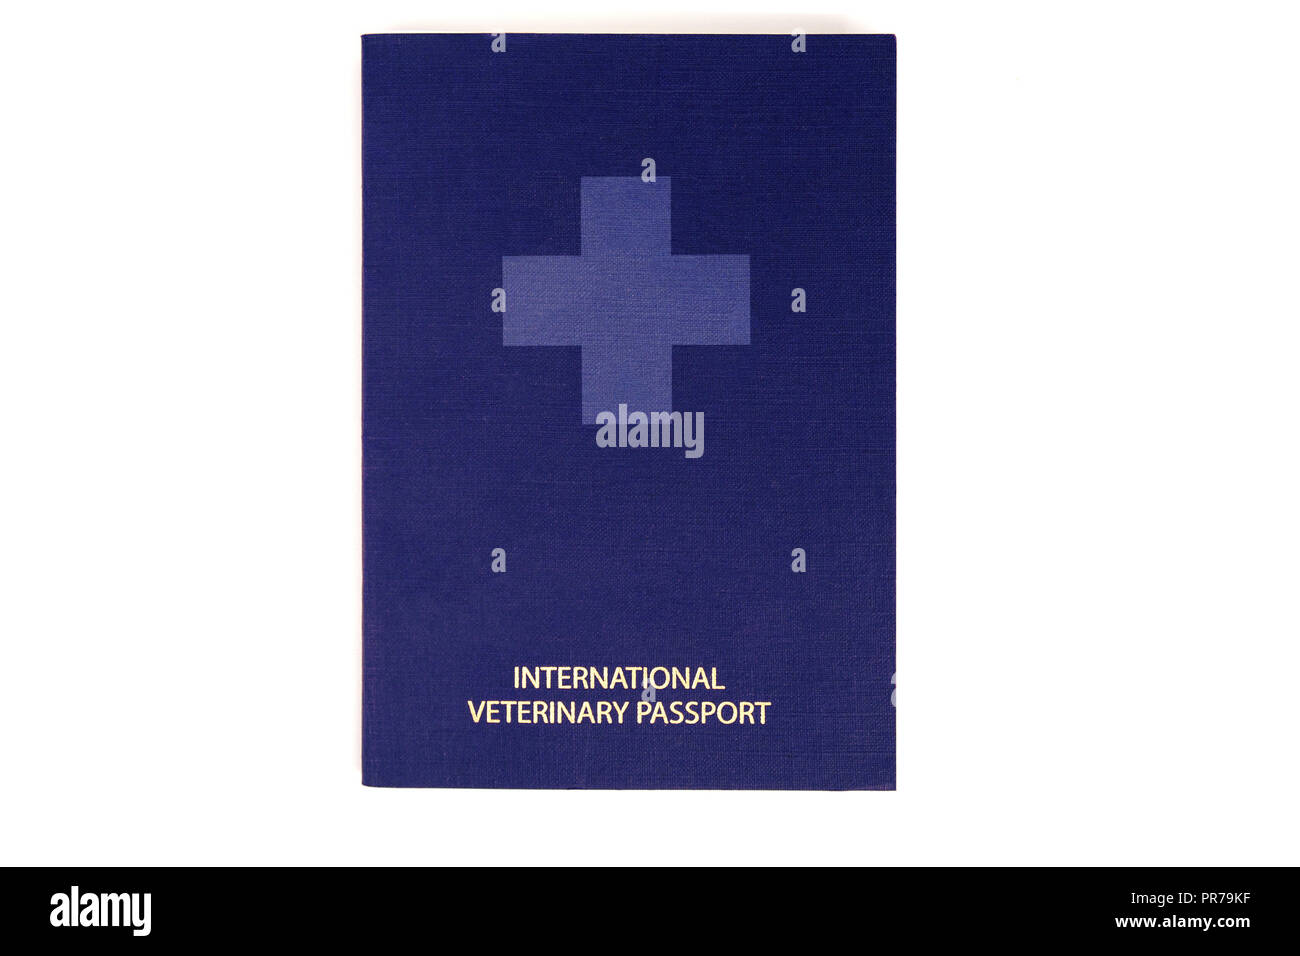 Veterinary (pet) passport of an animal on an isolated background Stock Photo